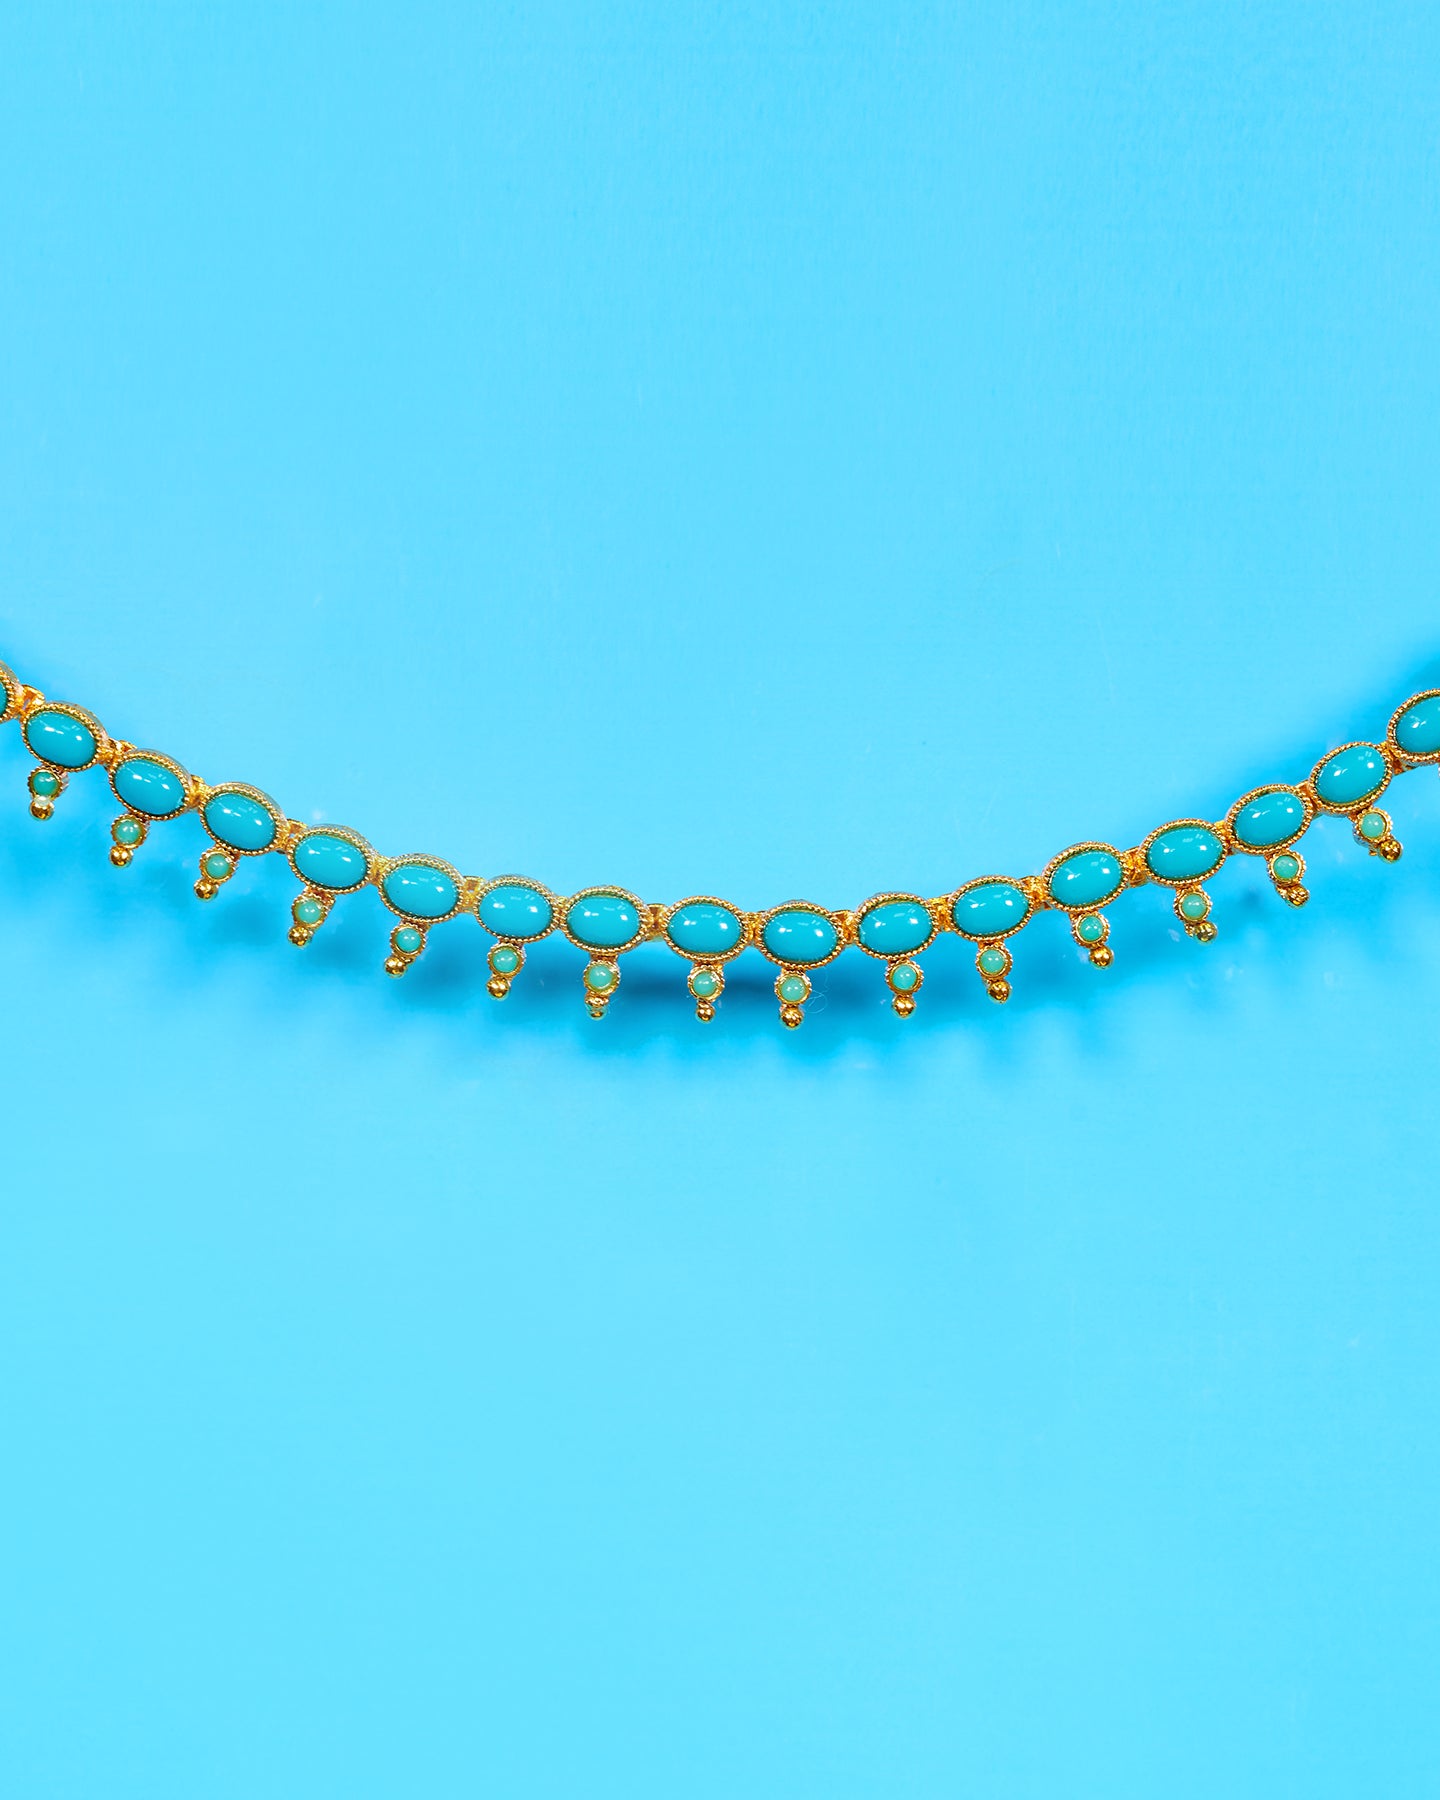 Cora Turquoise Blue String Necklace